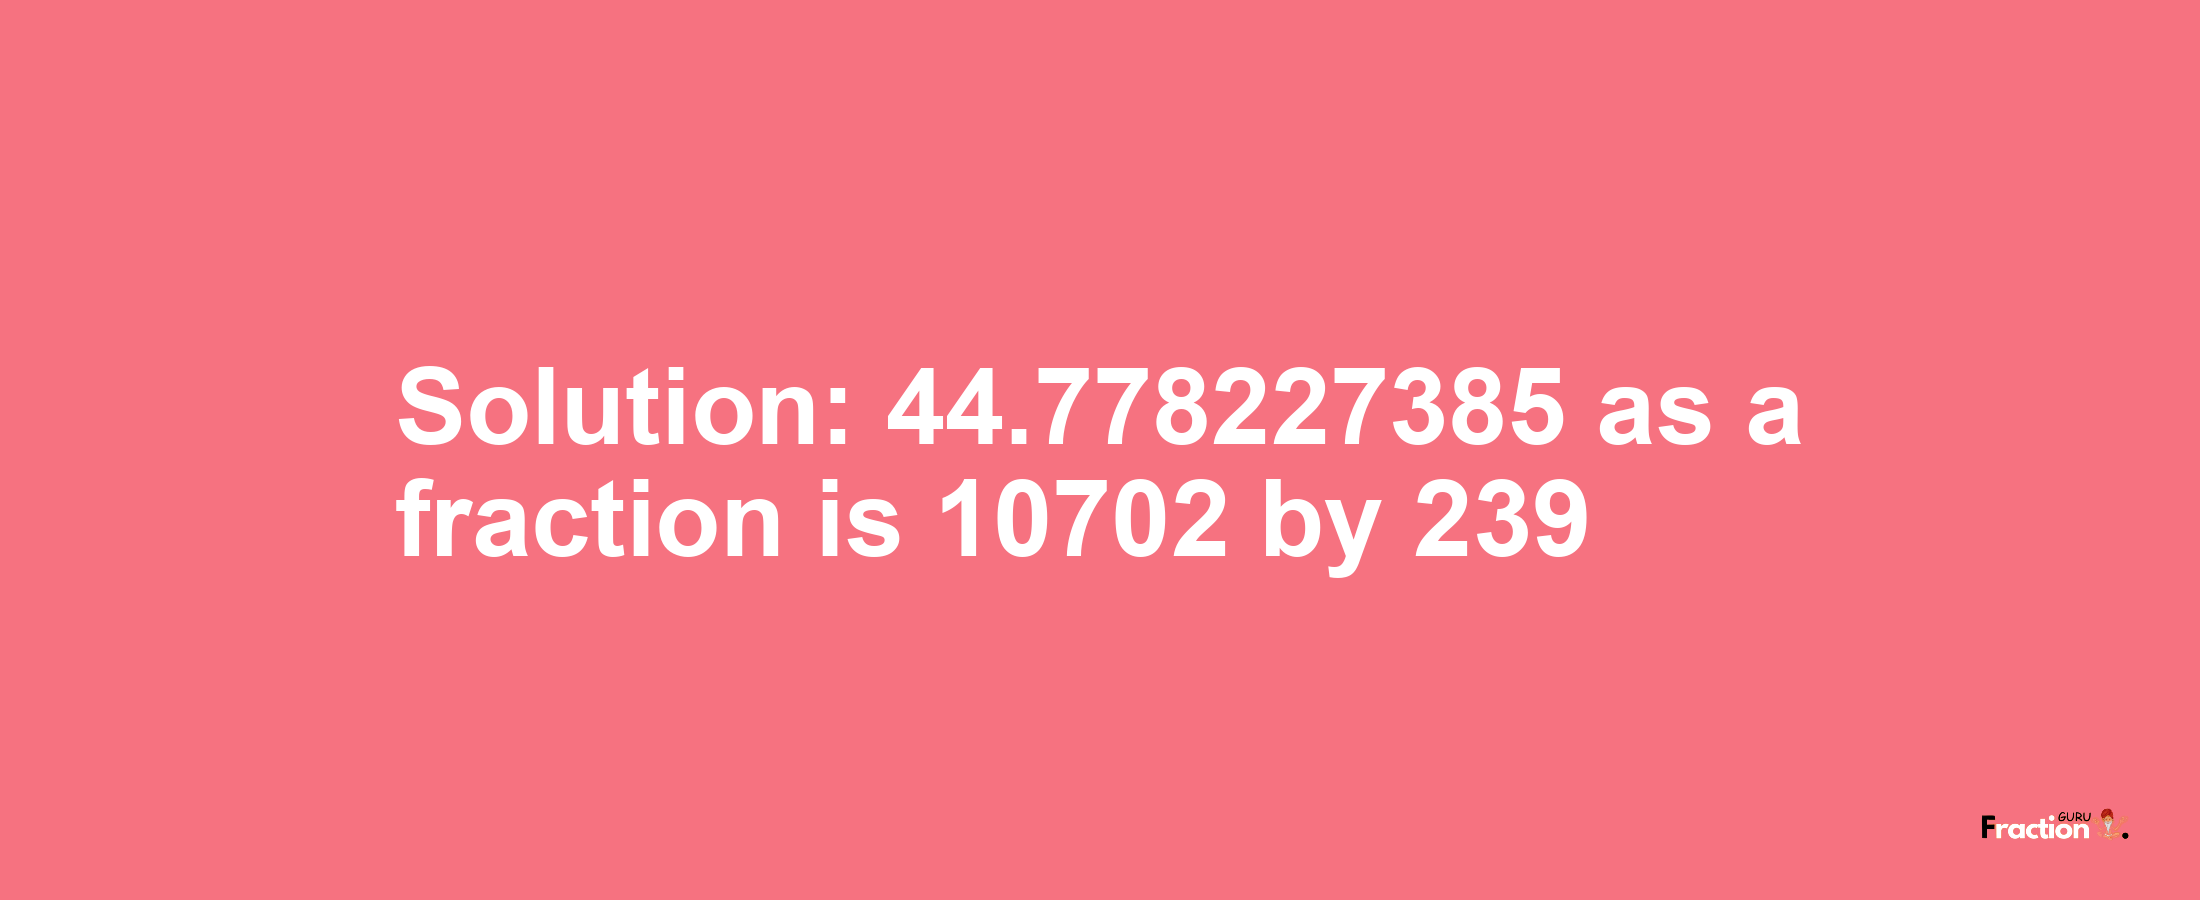 Solution:44.778227385 as a fraction is 10702/239